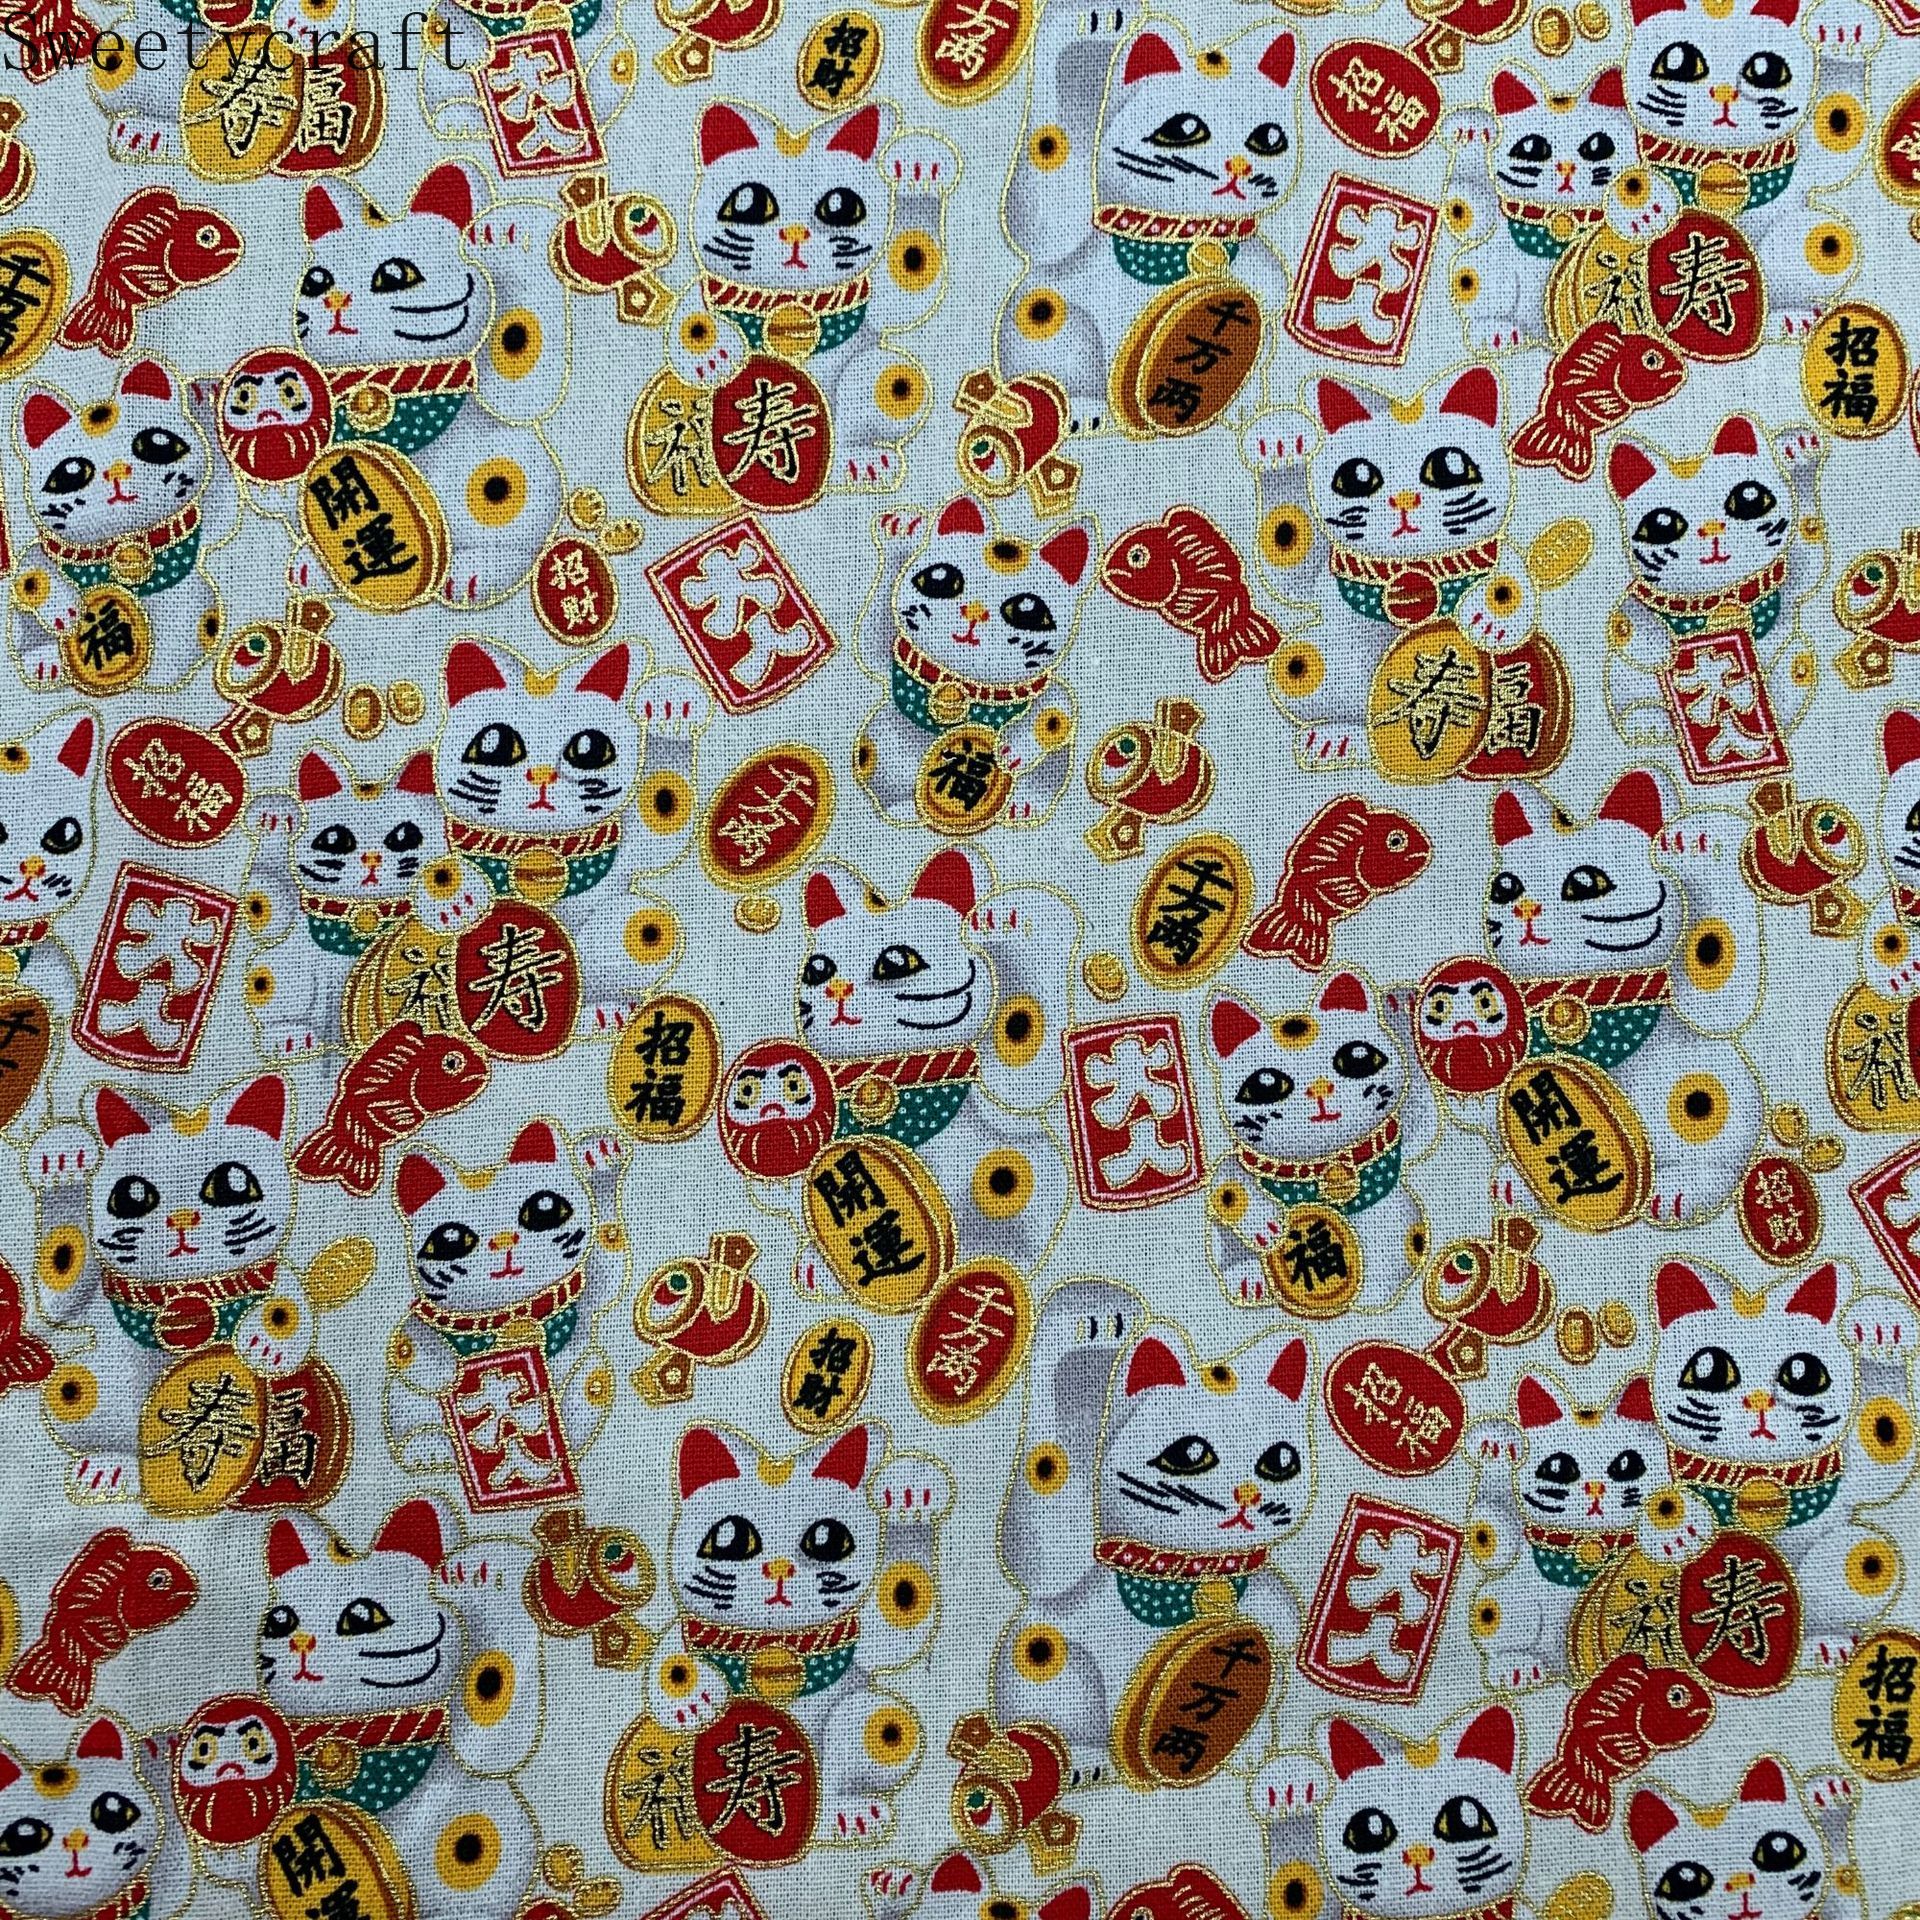 150x100cm Lucky Cat Printed bronzing Cotton Fabric Cloth Sewing Quilting Fabric for Patchwork Needlework DIY Handmade Material